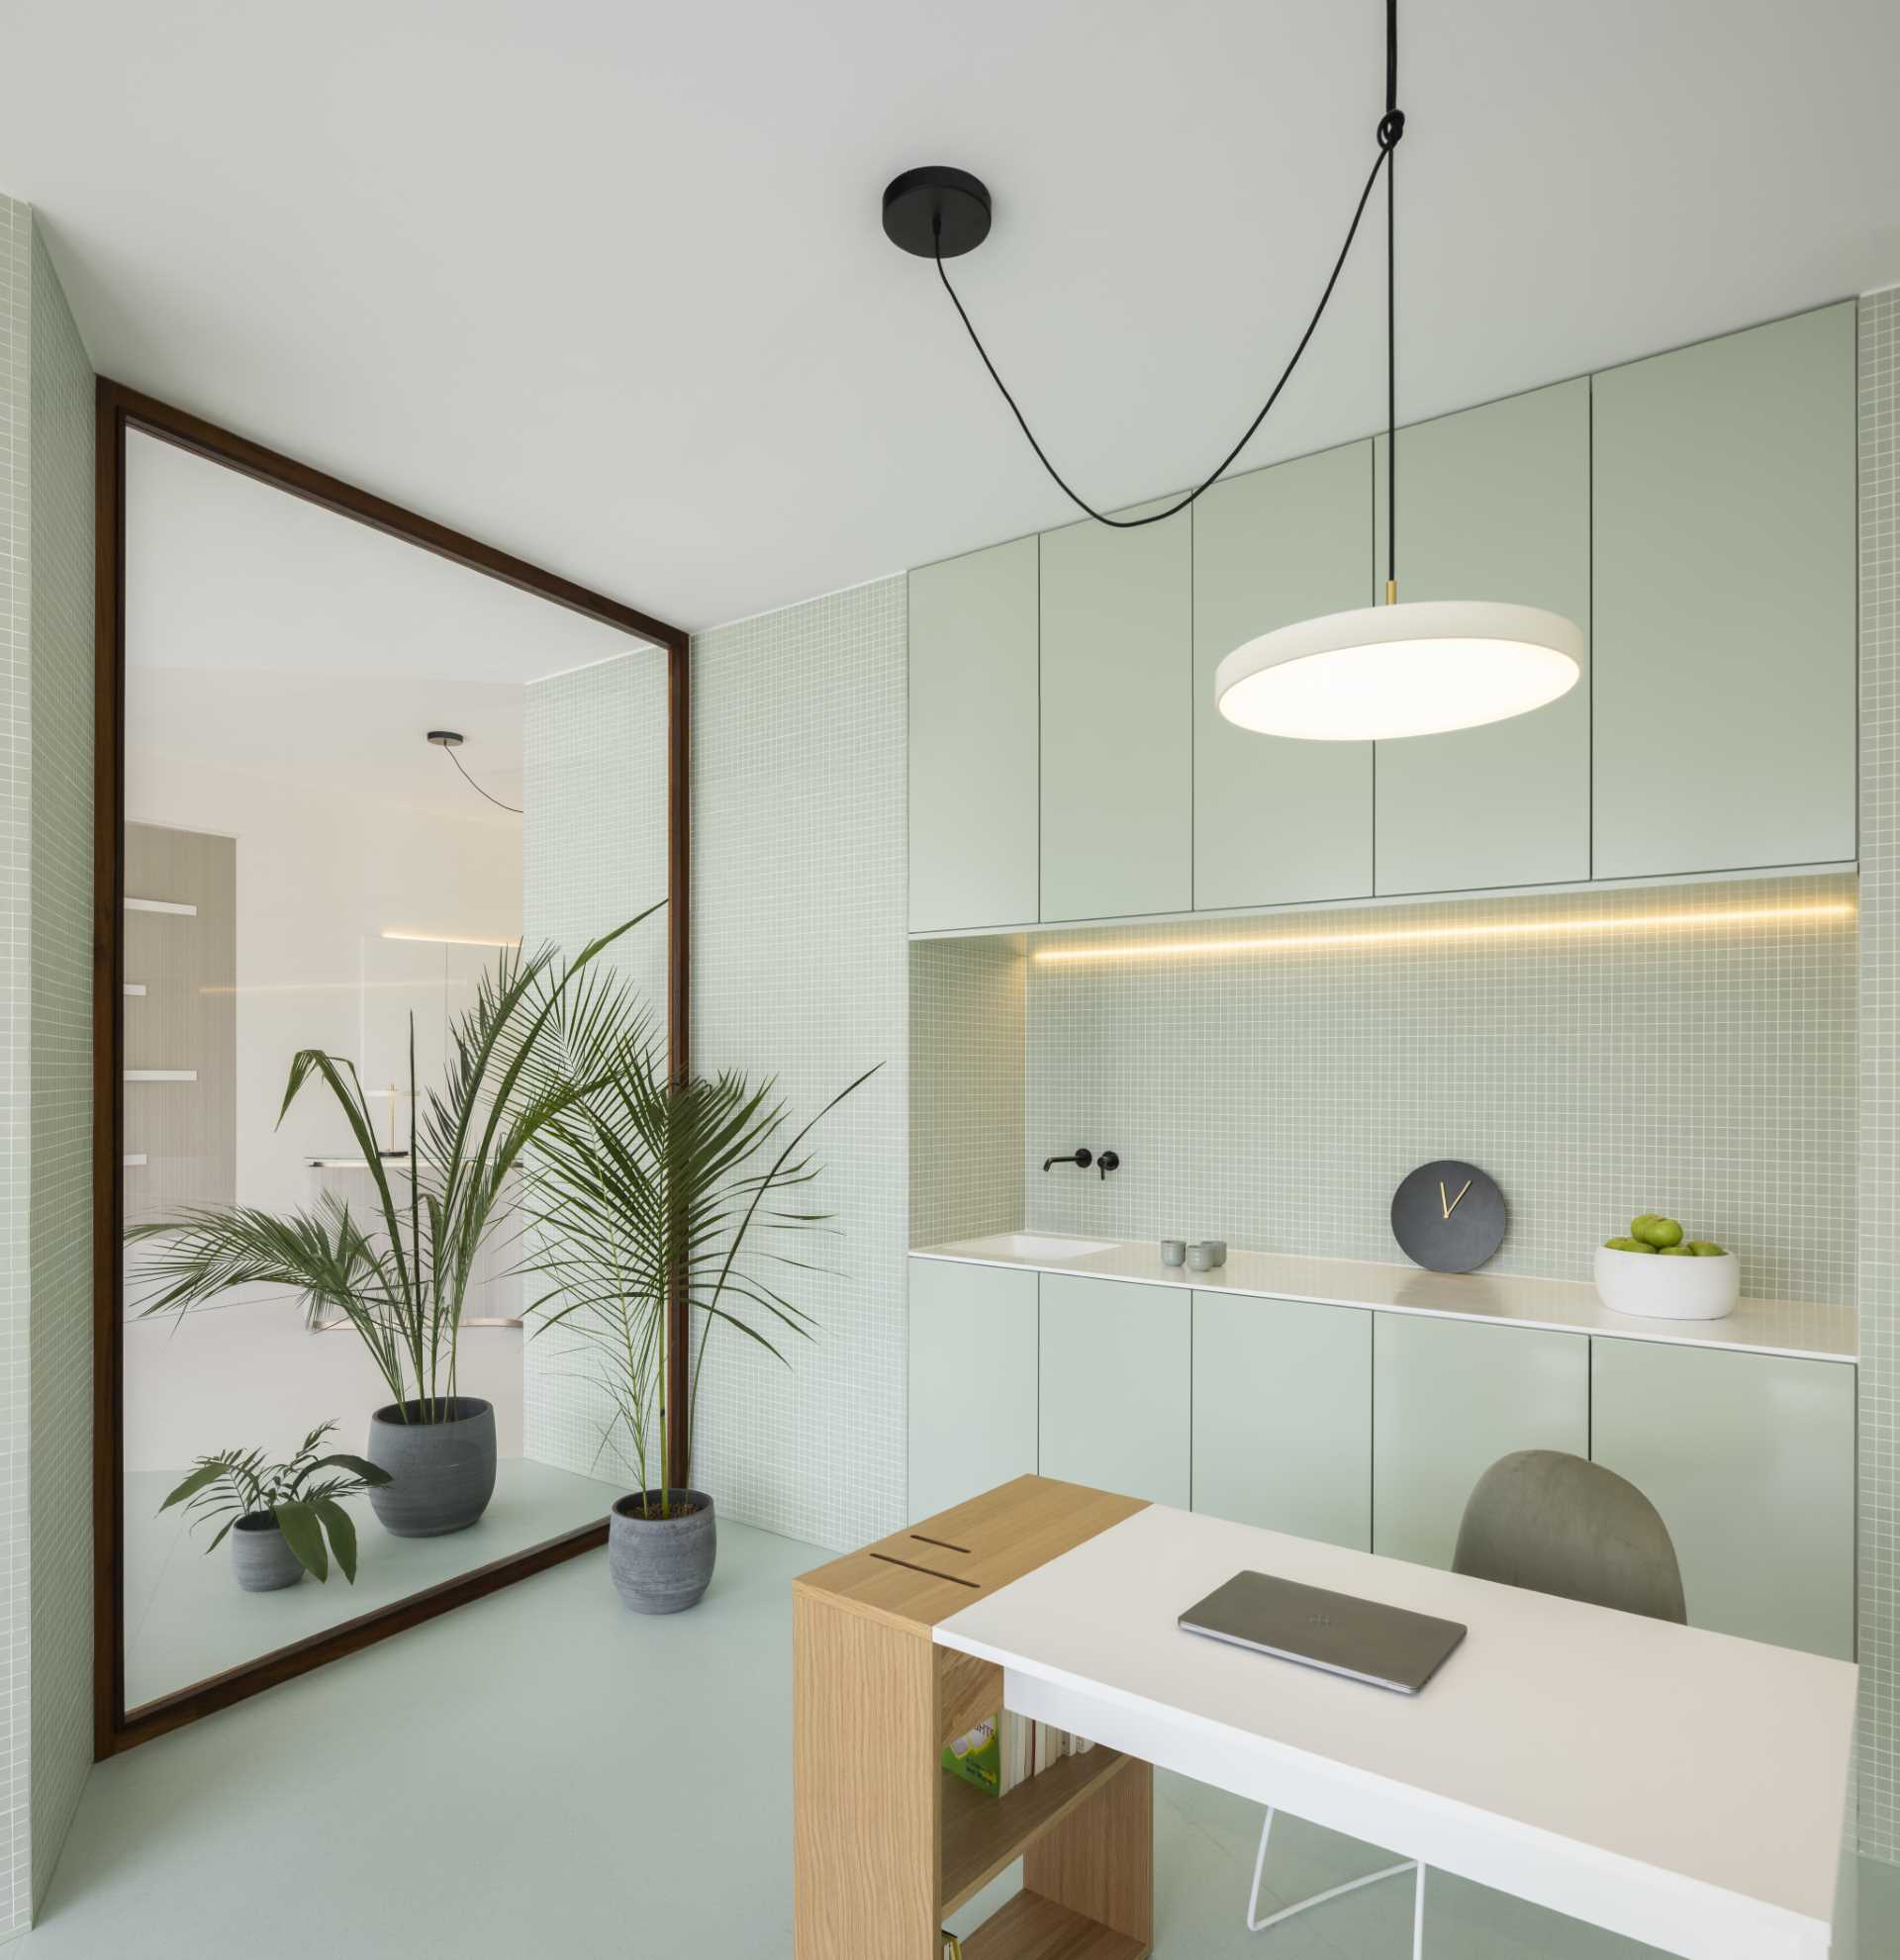 A modern health clinic office includes pastel green cabinets and tiles.